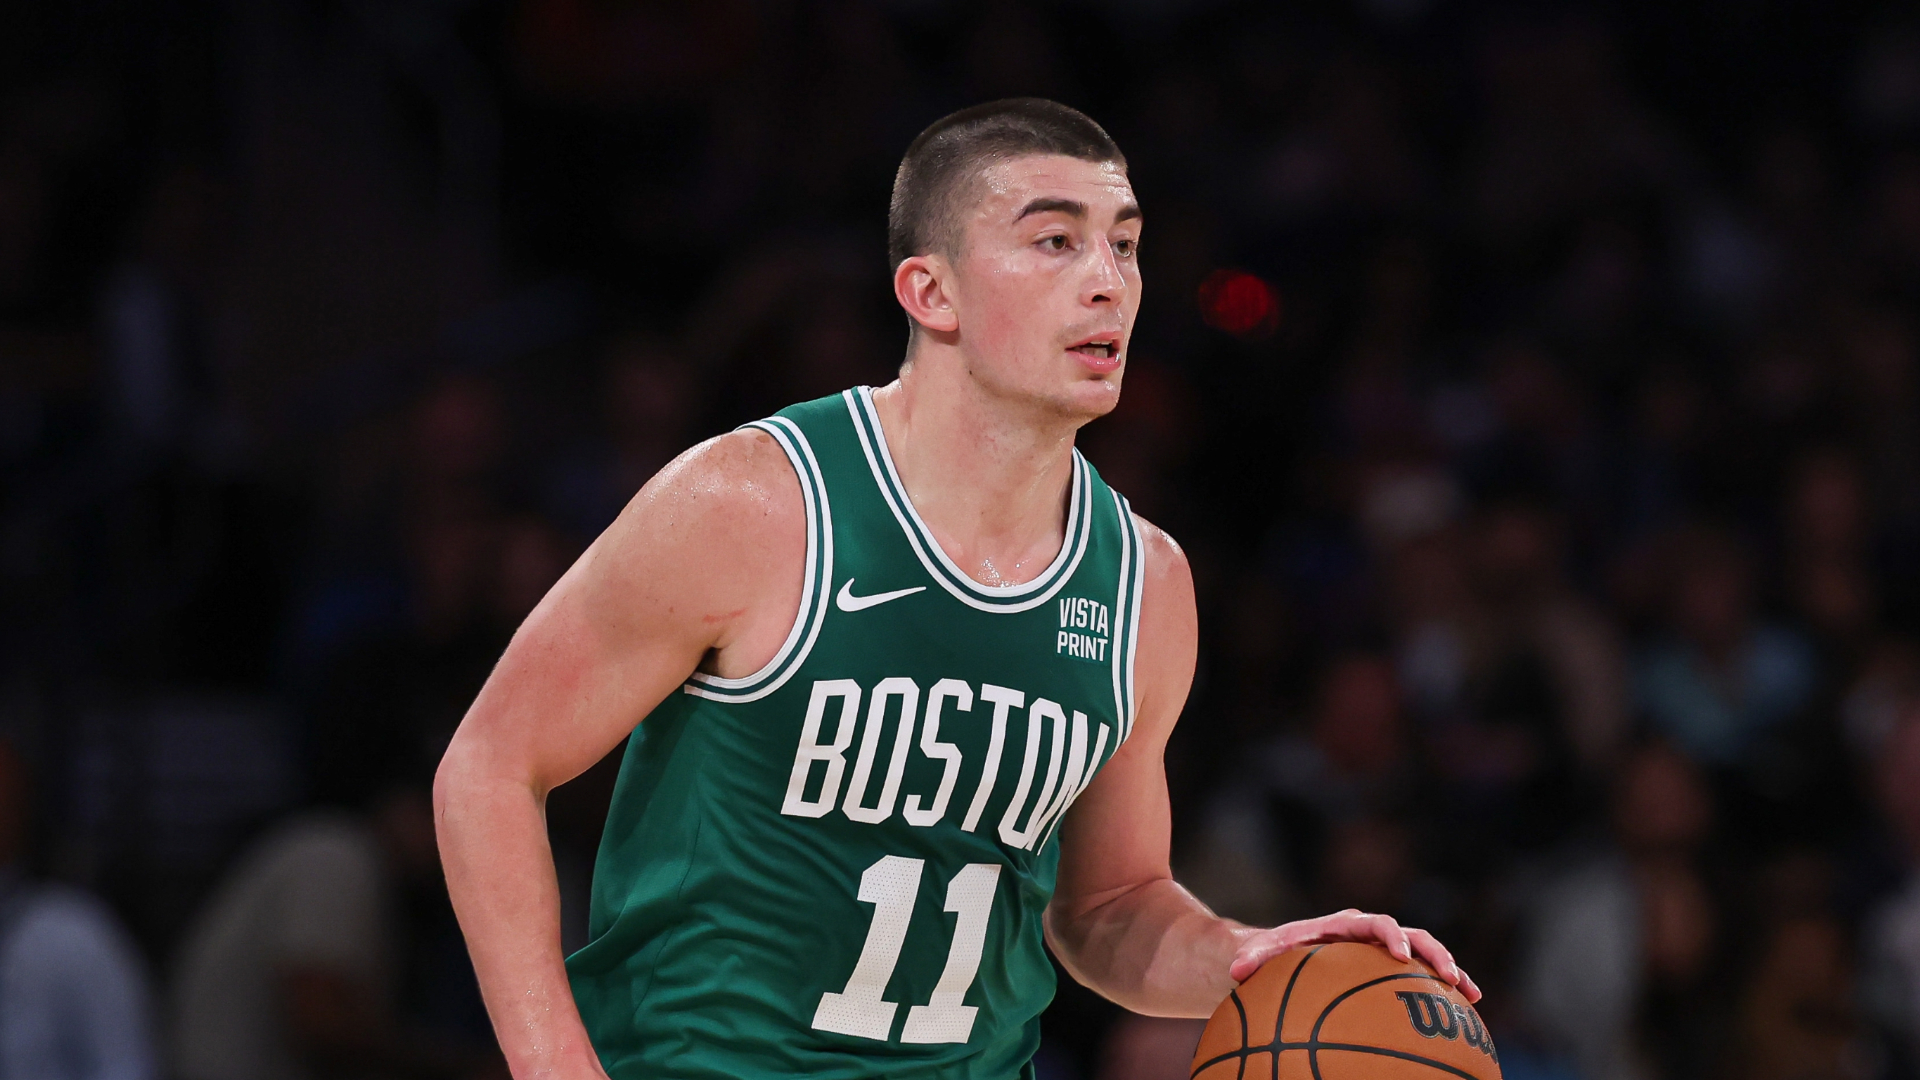 More Injury Issues For The Boston Celtics